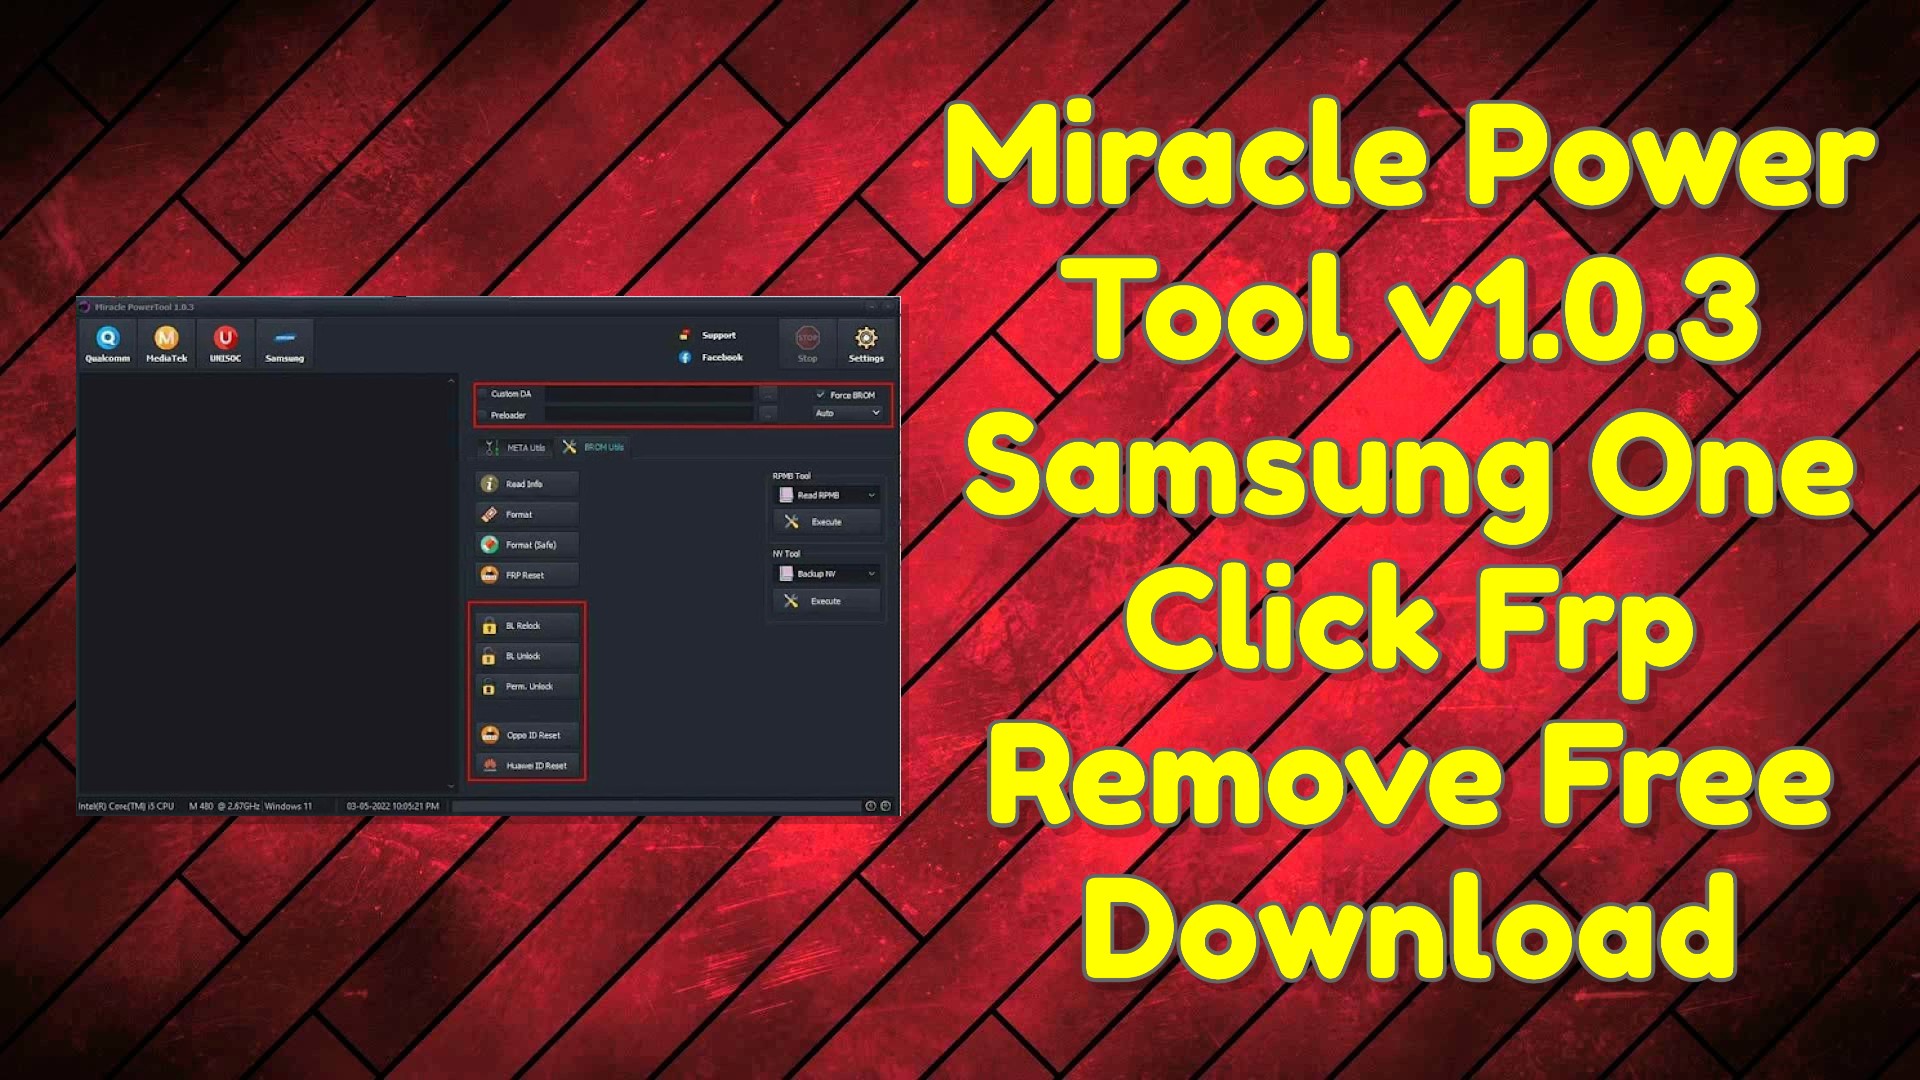 Miracle Power Tool v1.0.3 Samsung One Click Frp Remove Free Download